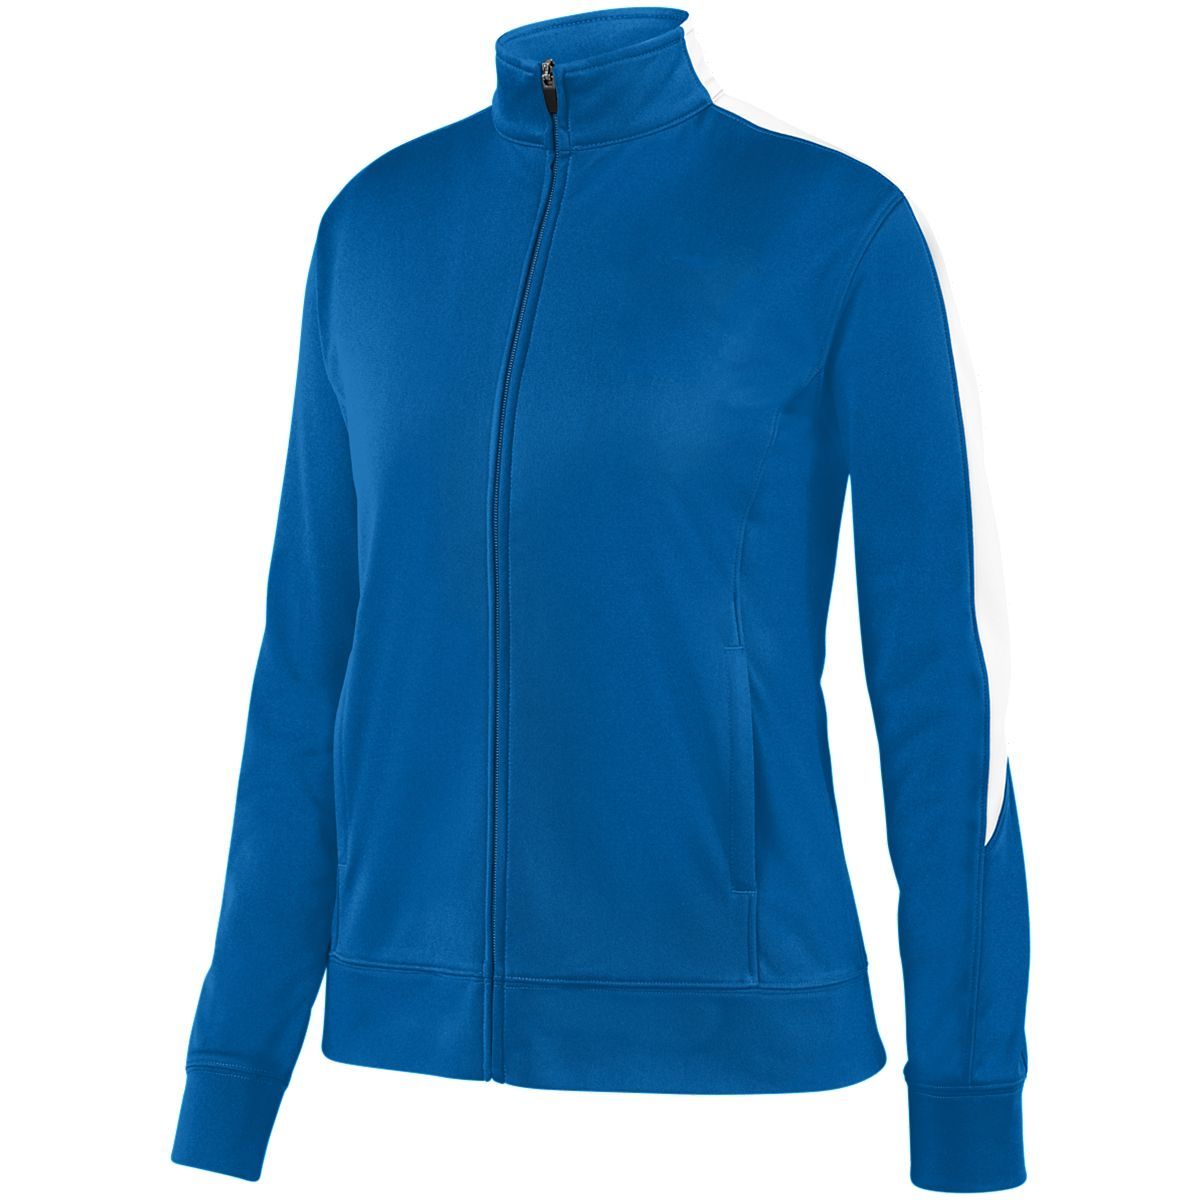 Augusta Sportswear Ladies Medalist Jacket 2.0 in Royal/White  -Part of the Ladies, Ladies-Jacket, Augusta-Products, Outerwear product lines at KanaleyCreations.com